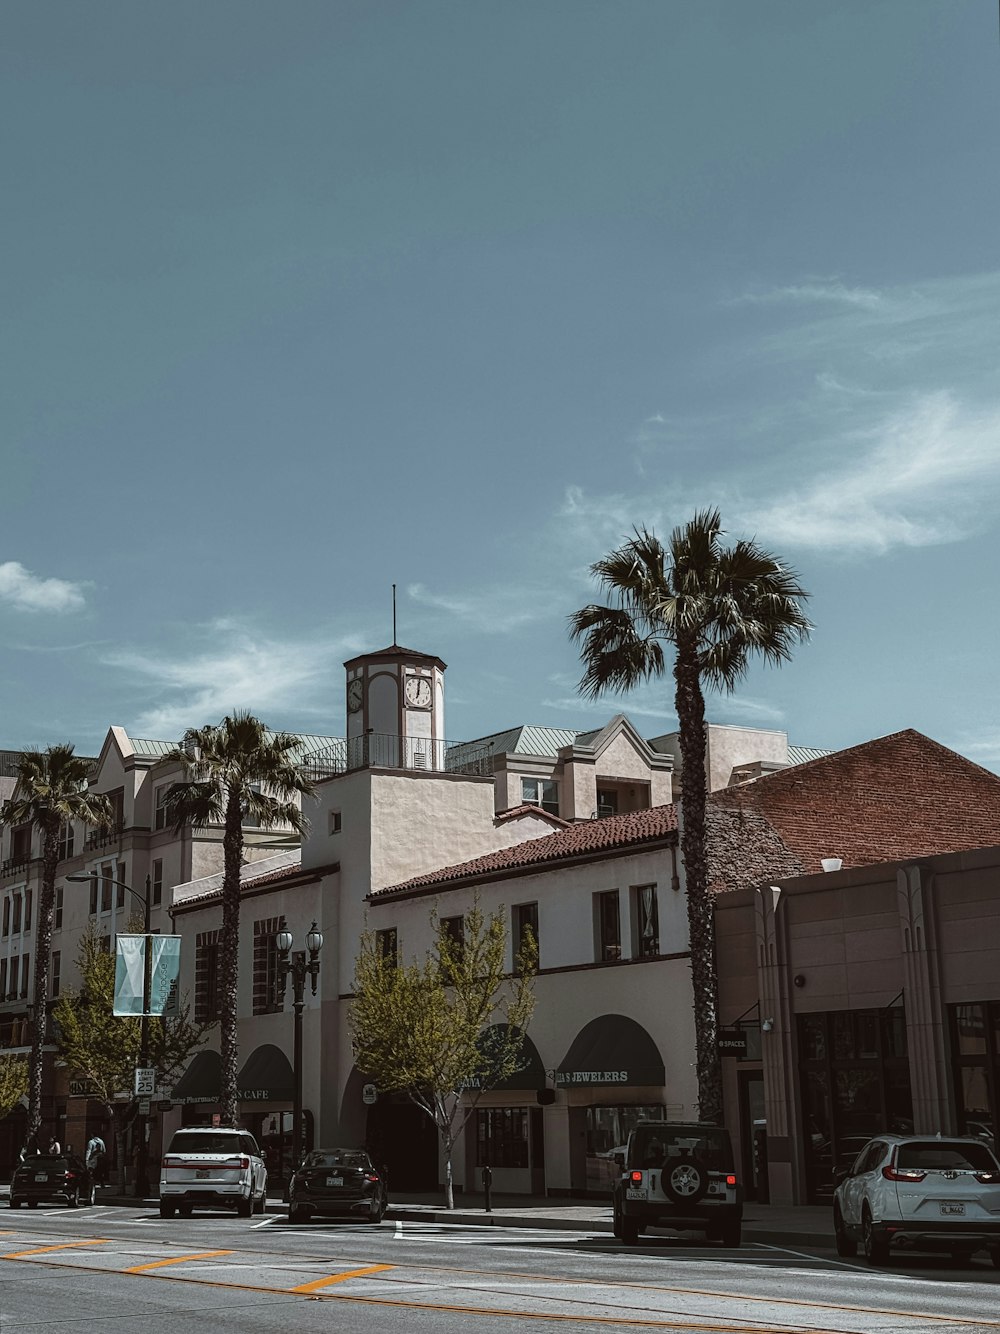 a city street with palm trees and a clock tower